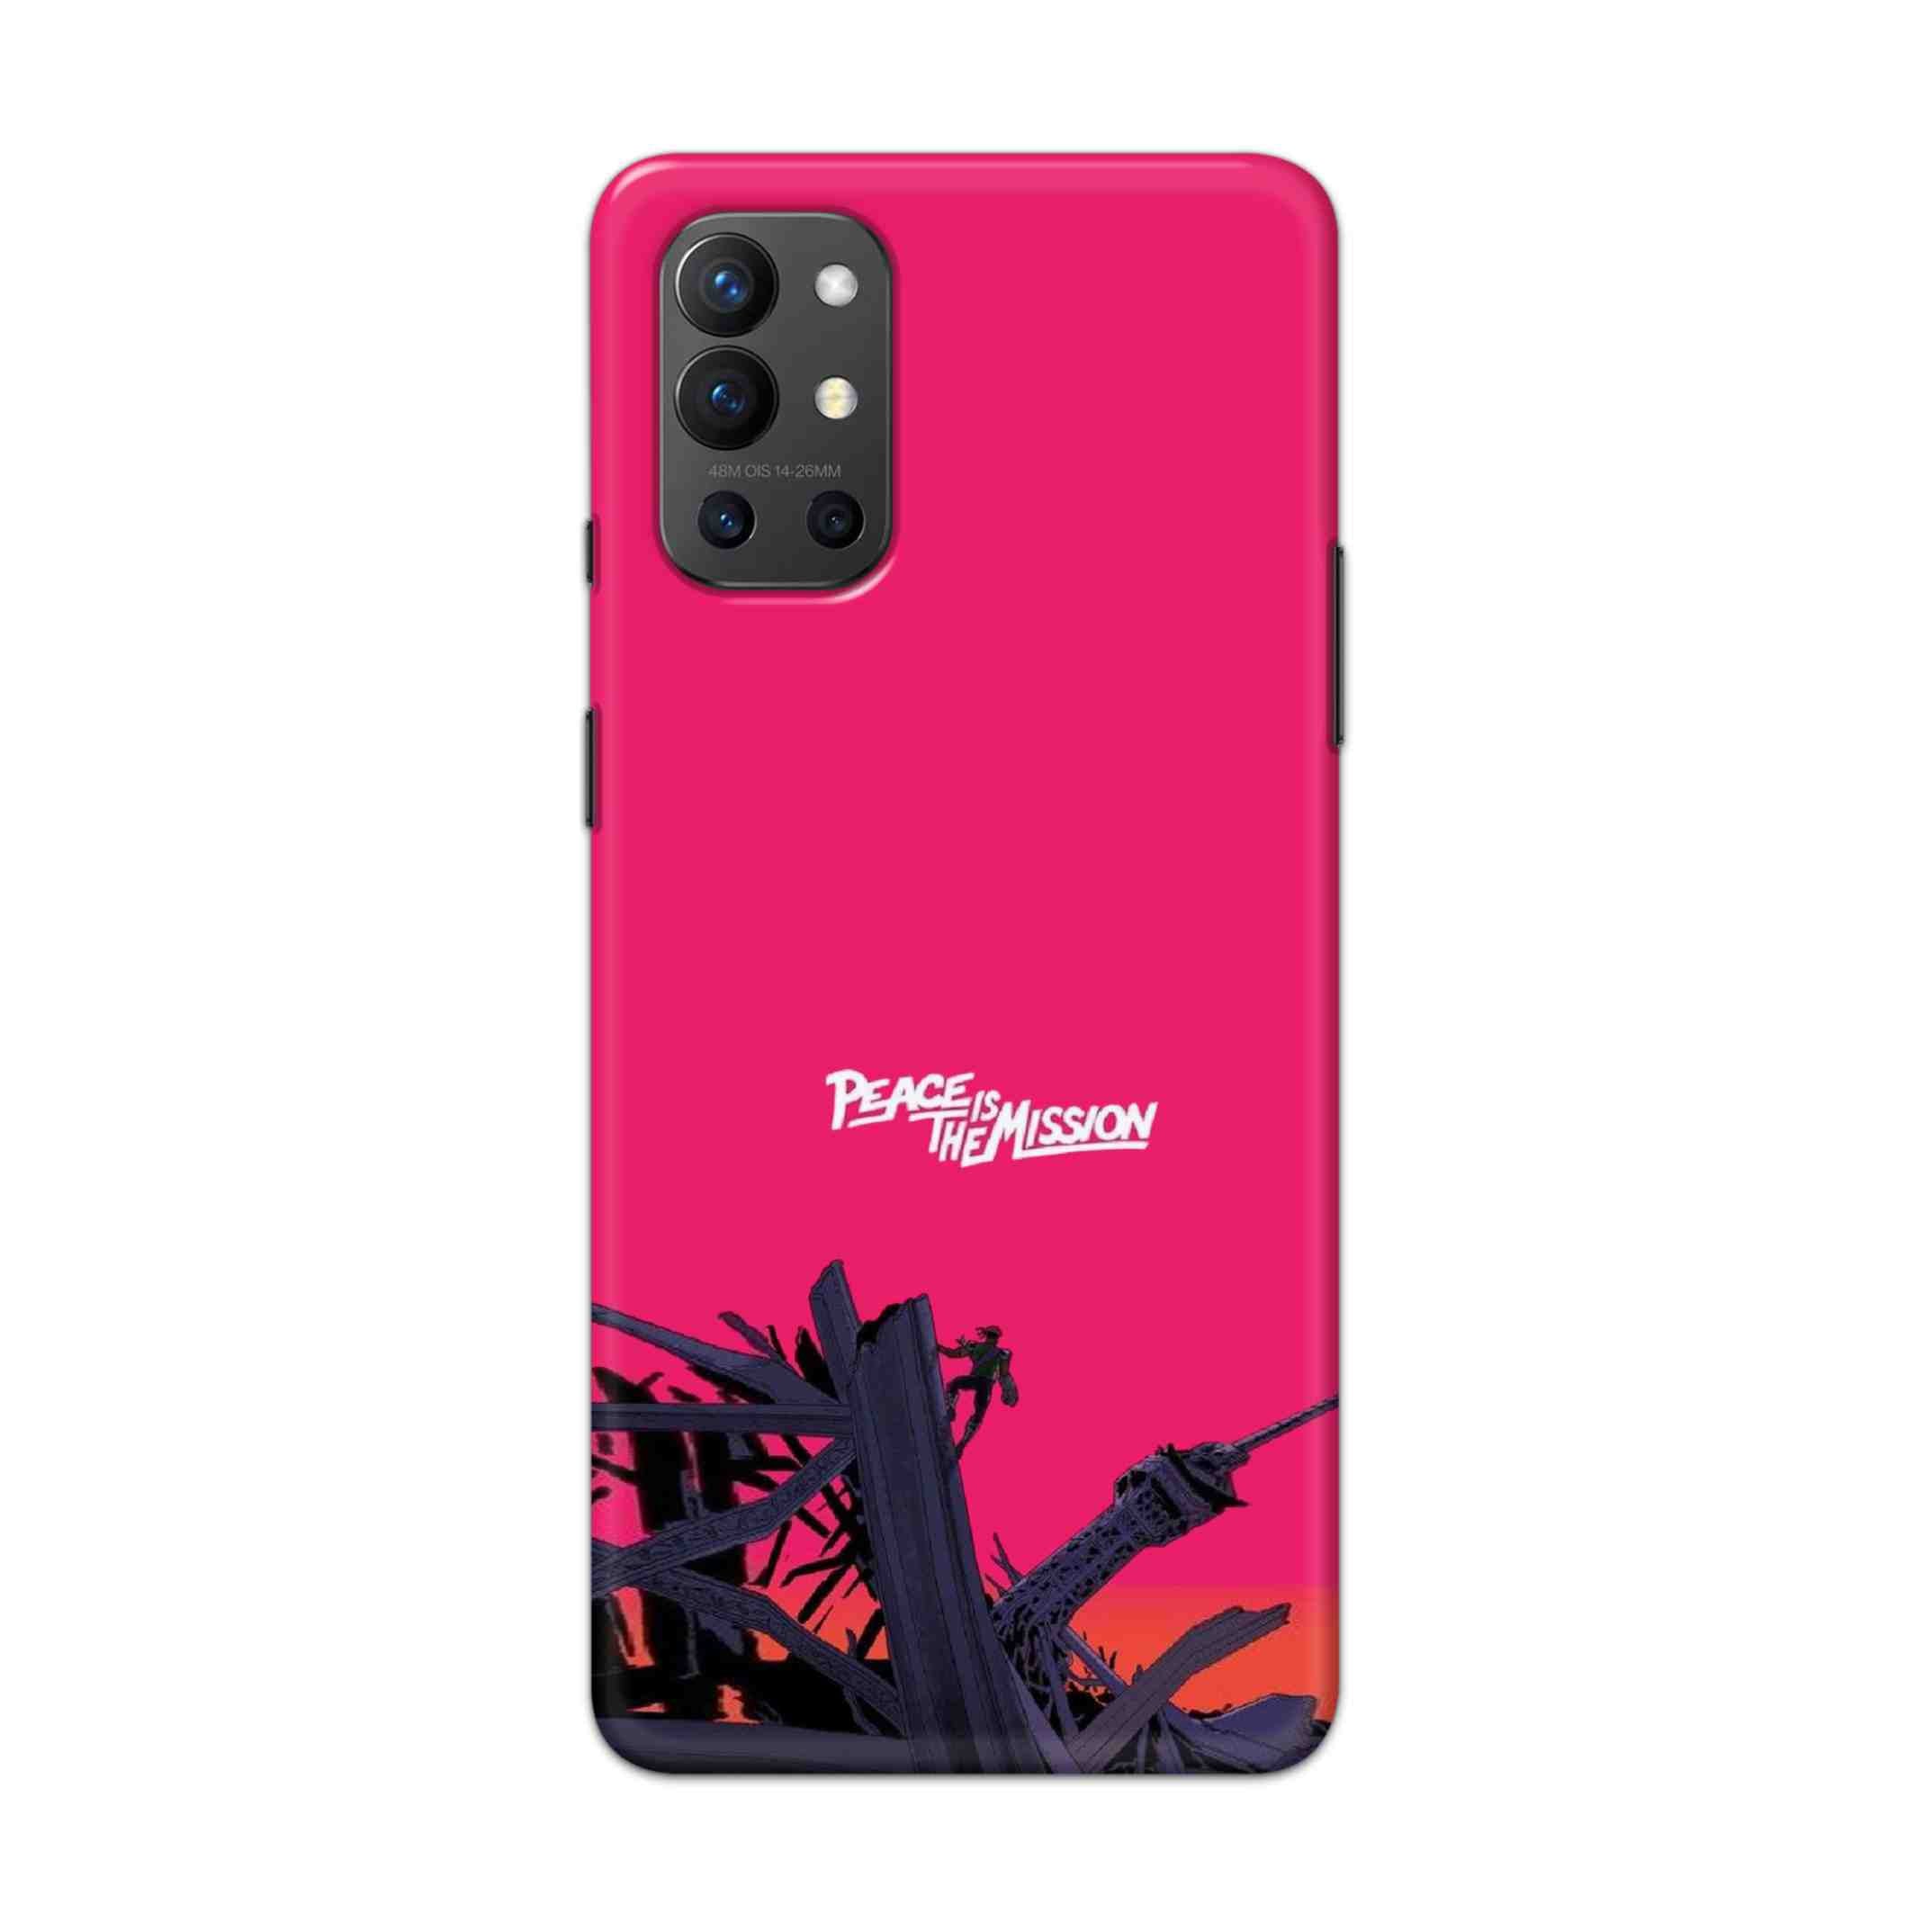 Buy Peace Is The Mission Hard Back Mobile Phone Case Cover For OnePlus 9R / 8T Online